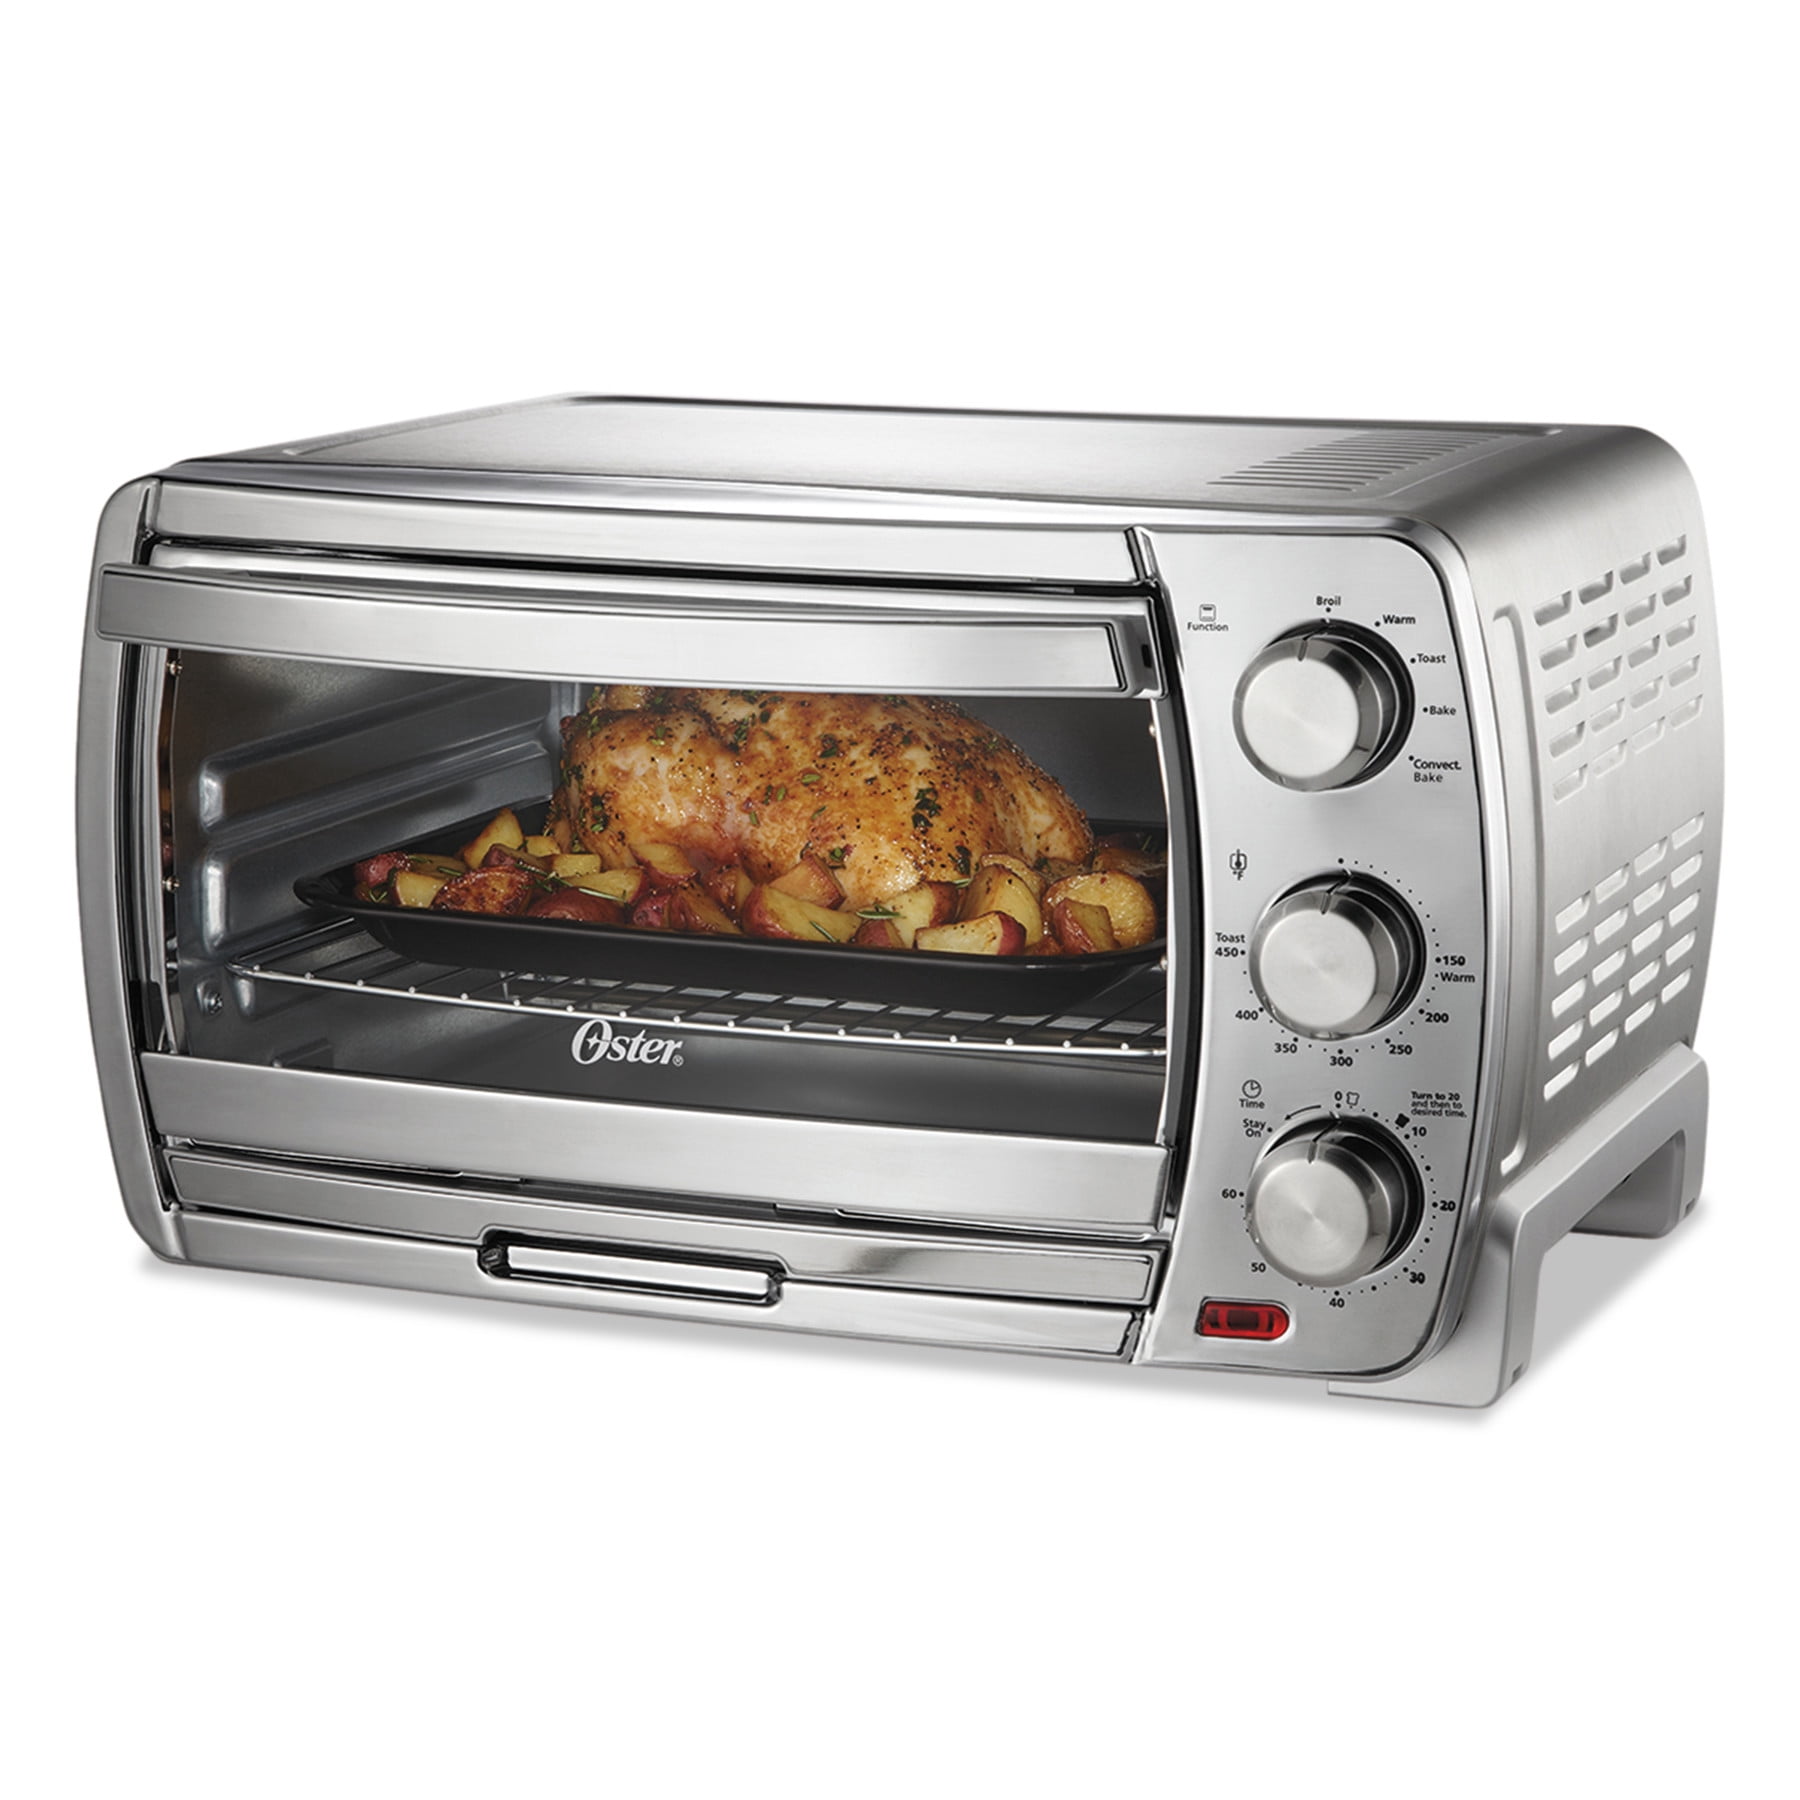 Oster Extra Large Countertop Convection Oven 18 8 X 22 1 2 X 14 1